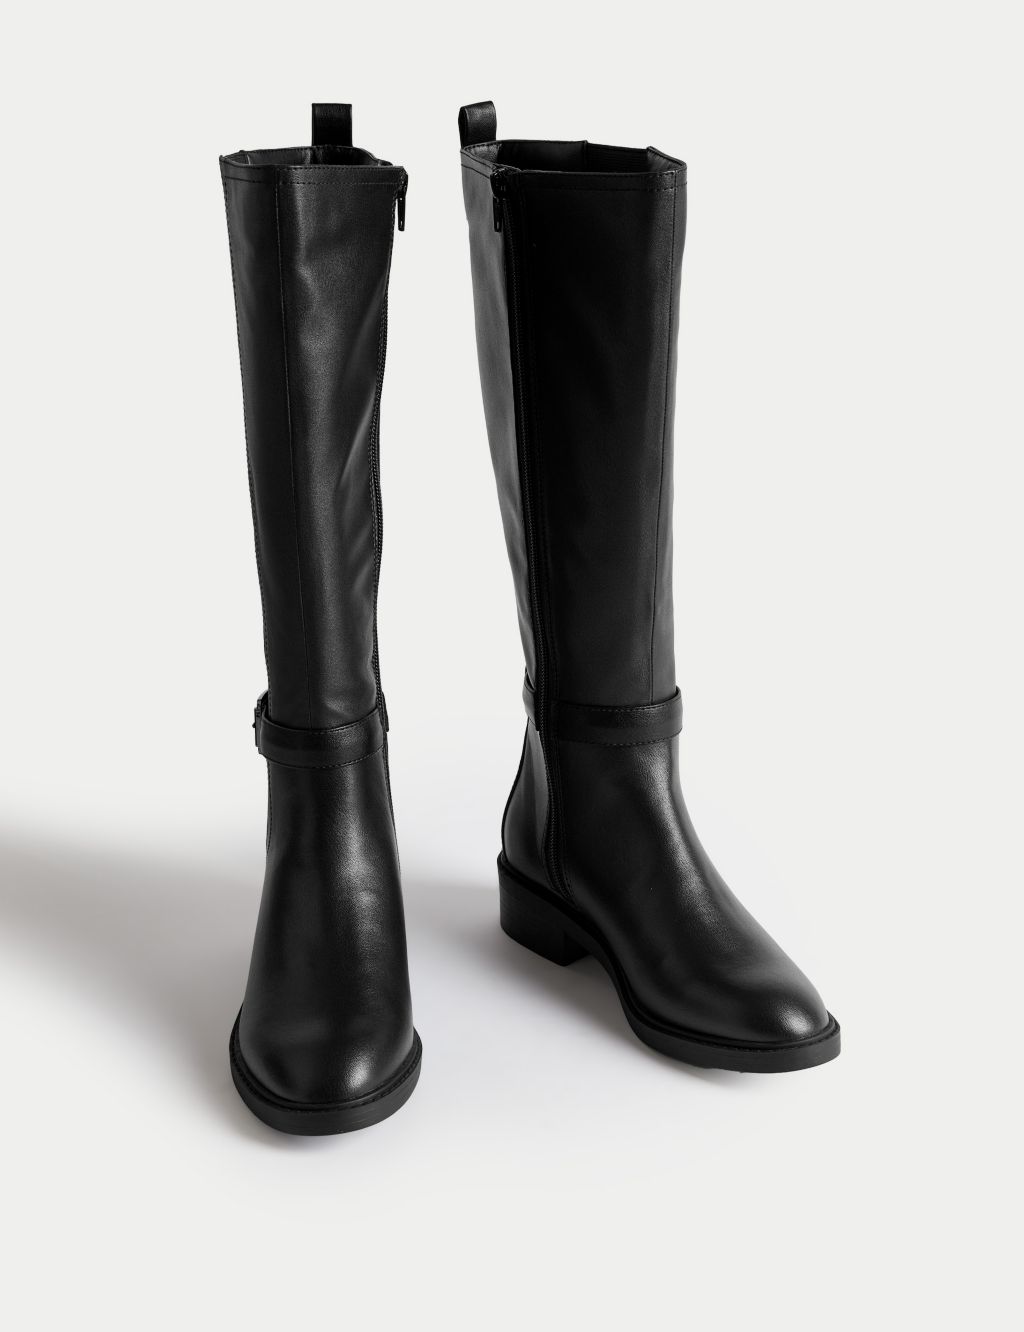 Riding Buckle Flat Knee High Boots image 2